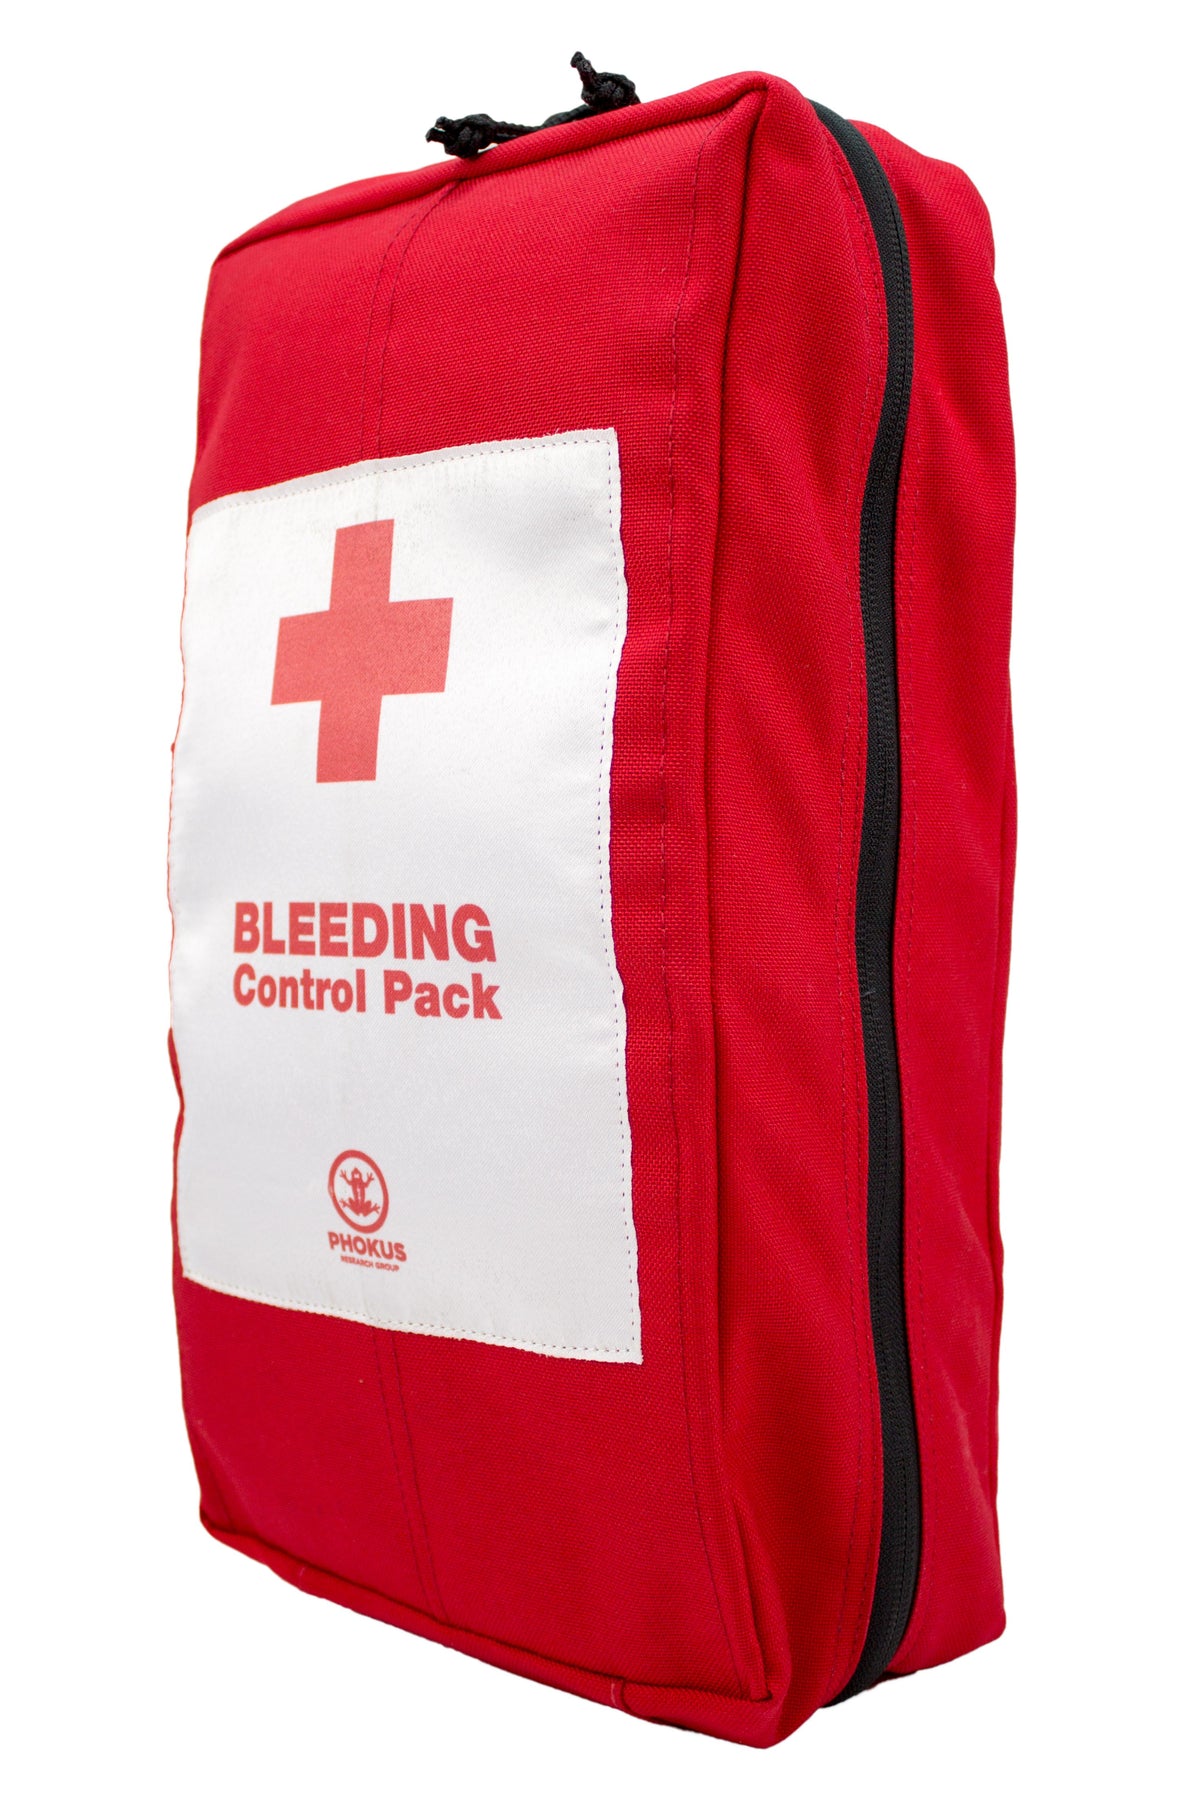 Bleeding Control Pack - Large - Phokus Research Group